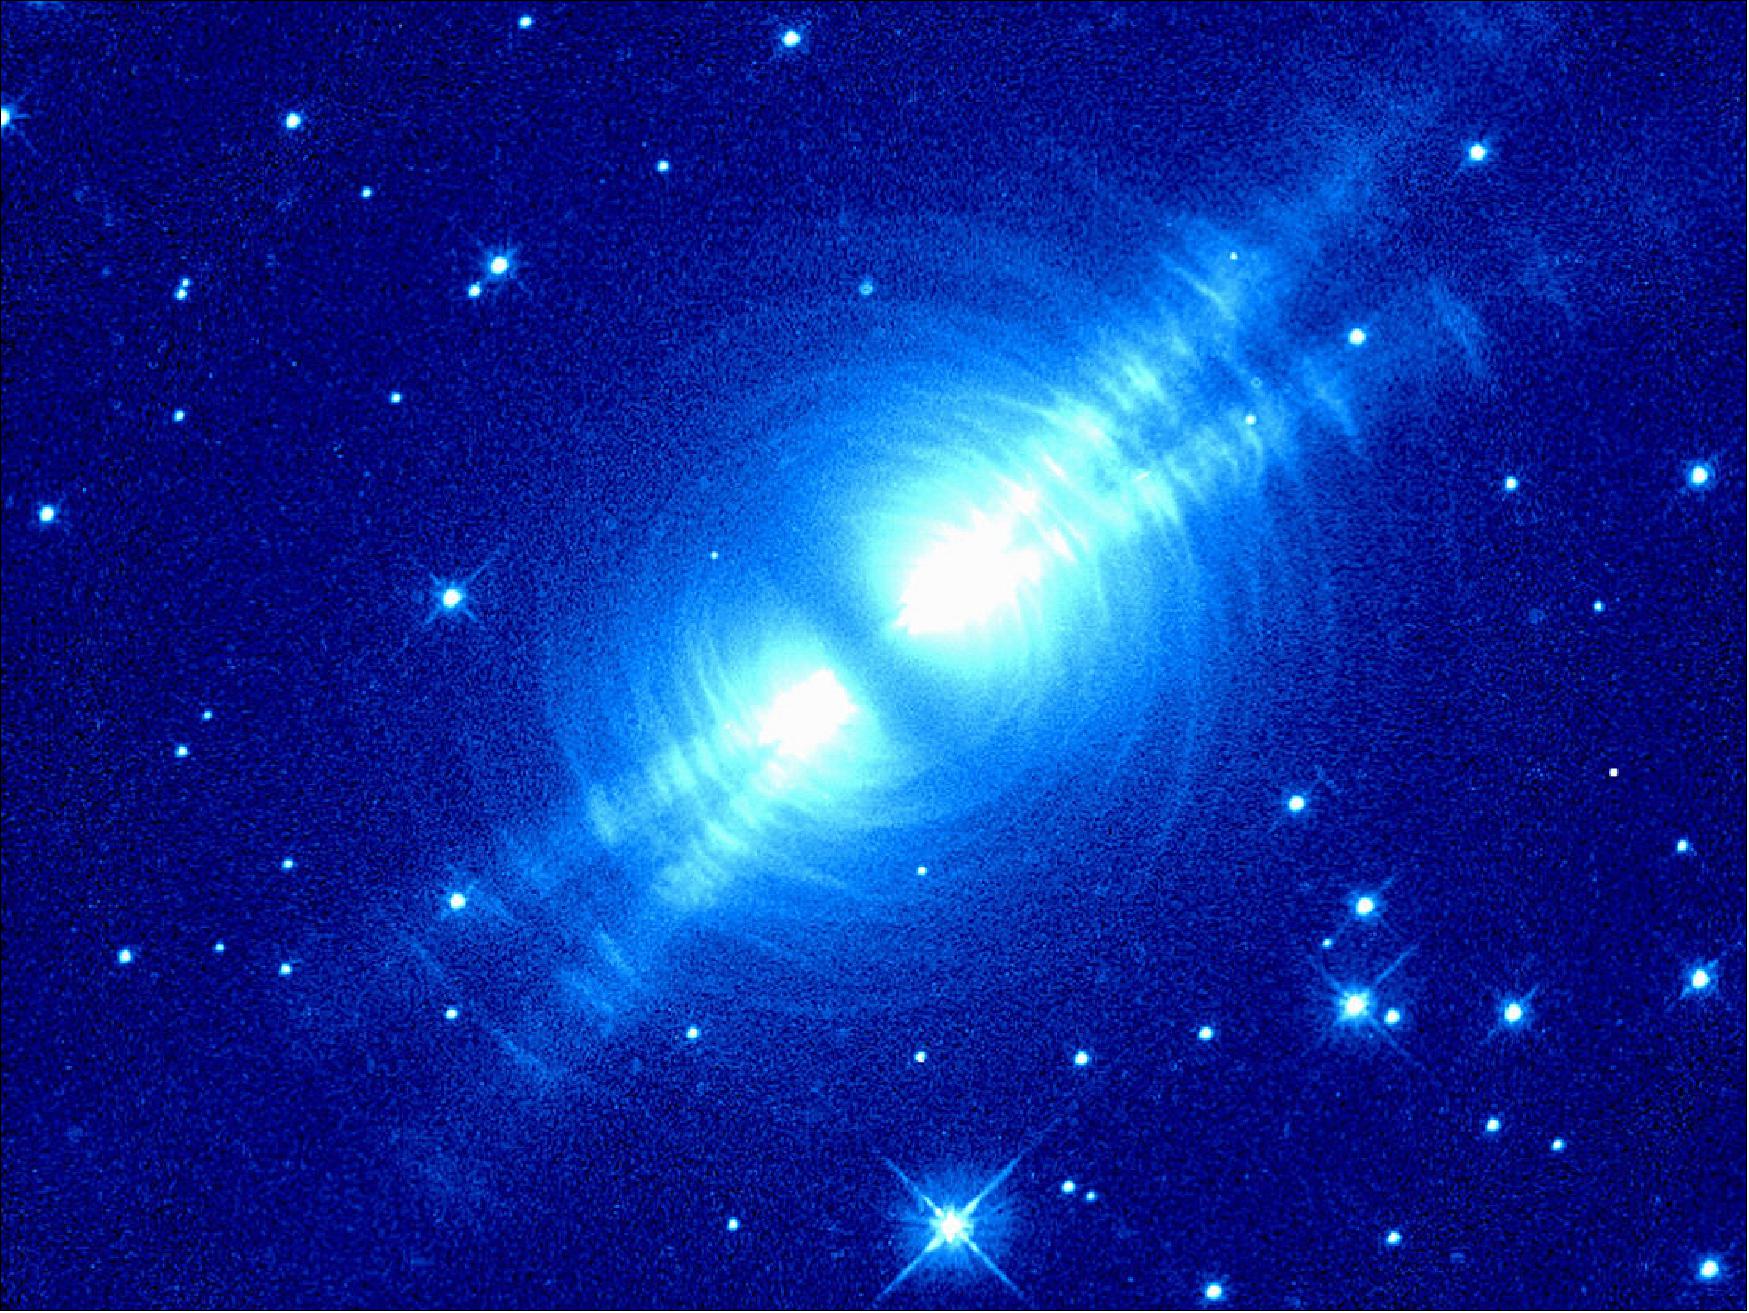 Figure 60: The Egg Nebula is a 'preplanetary nebula'. These objects occur as a dying star's hot remains briefly illuminates material it has expelled, lighting up the gas and dust that surrounds it. This image is based on observations performed in the mid 1990s in red light with the Wide Field and Planetary Camera 2 (WFPC2) on the NASA/ESA Hubble Space Telescope (image credit: Raghvendra Sahai and John Trauger (JPL), the WFPC2 science team, and NASA/ESA)